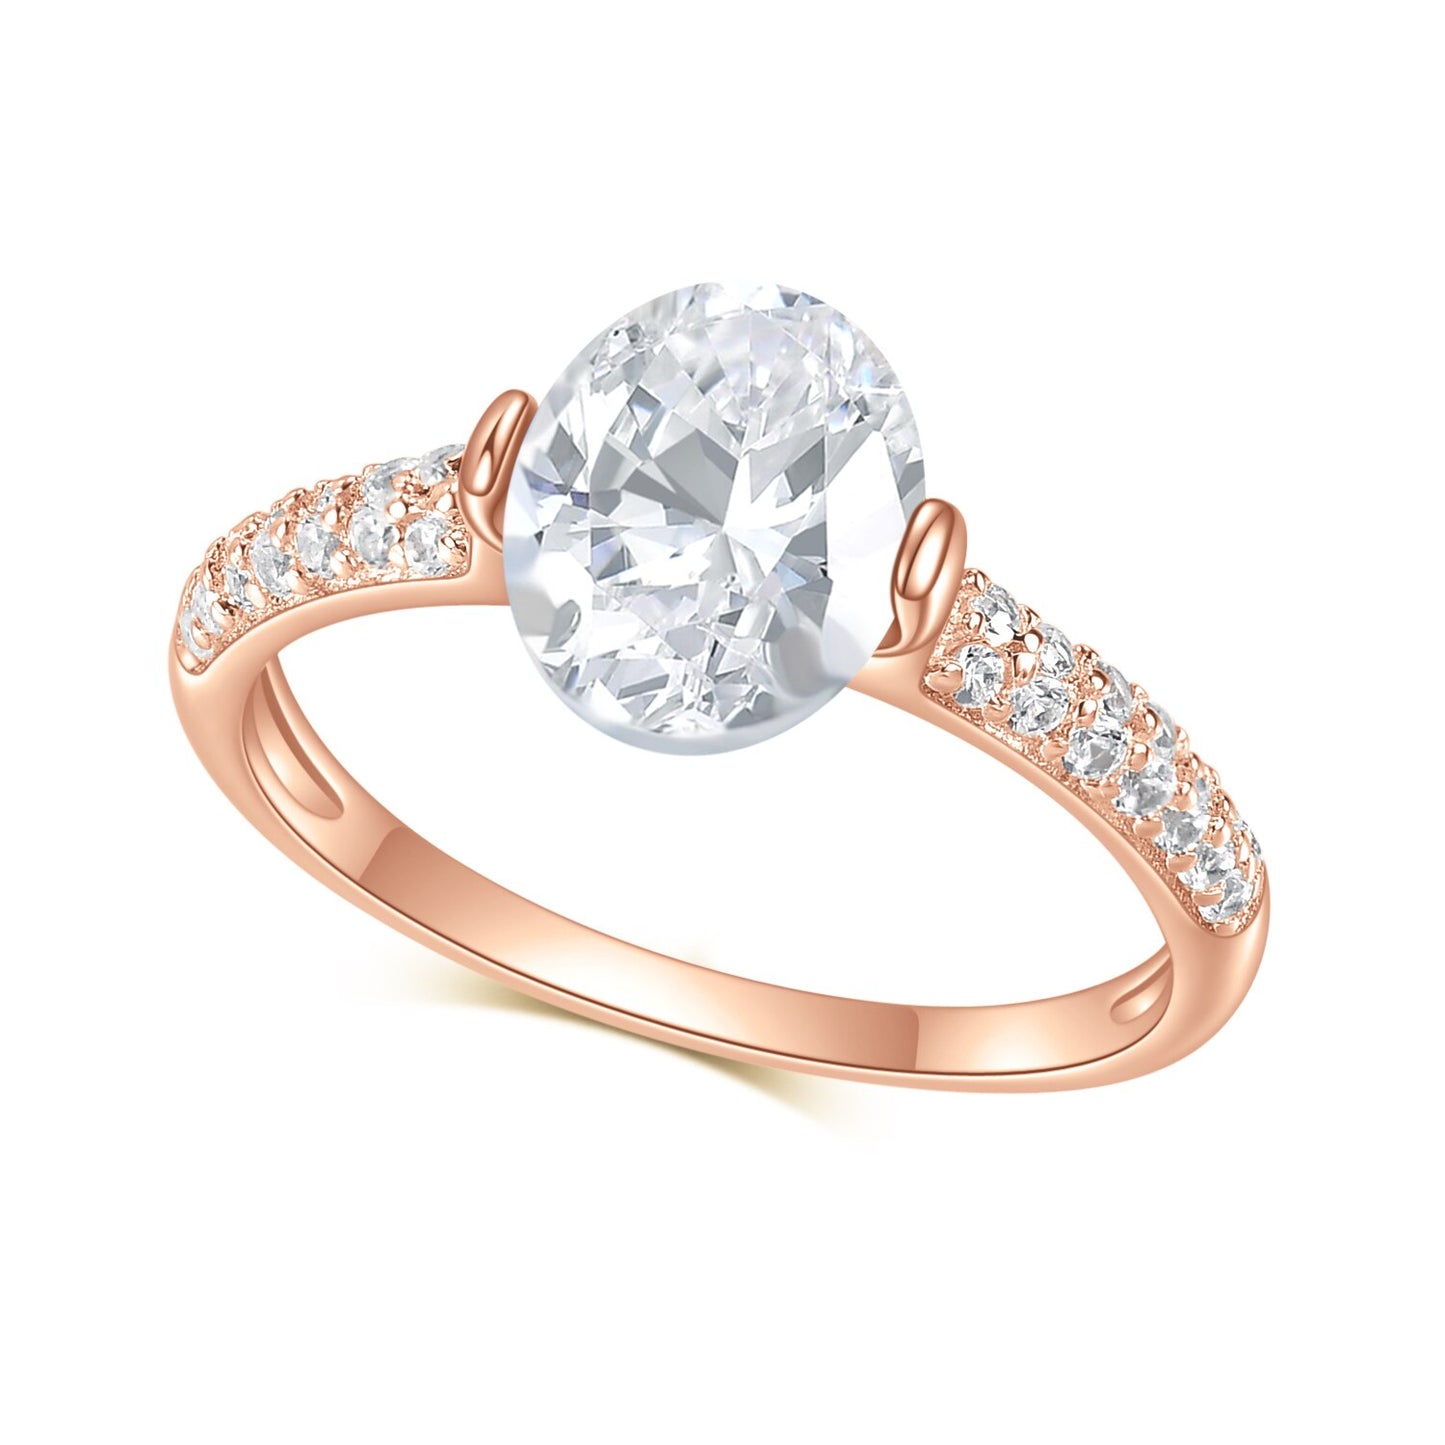 A rose gold tension set ring with a oval moissanite and double row pave band.